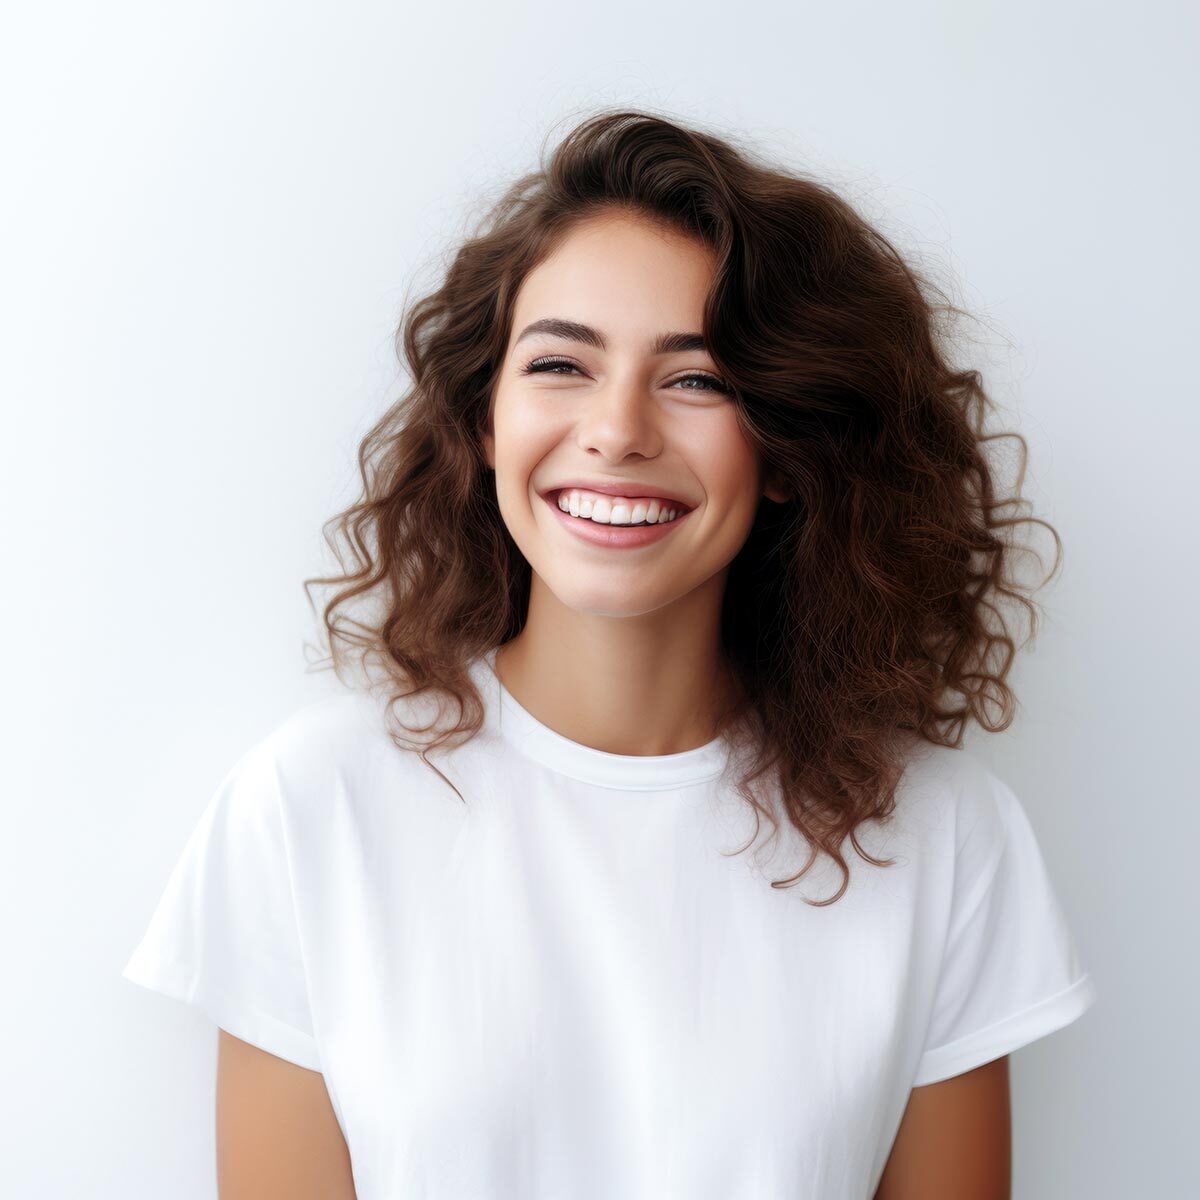 Young woman with curly hair and a white t-shirt laughing on a light background.